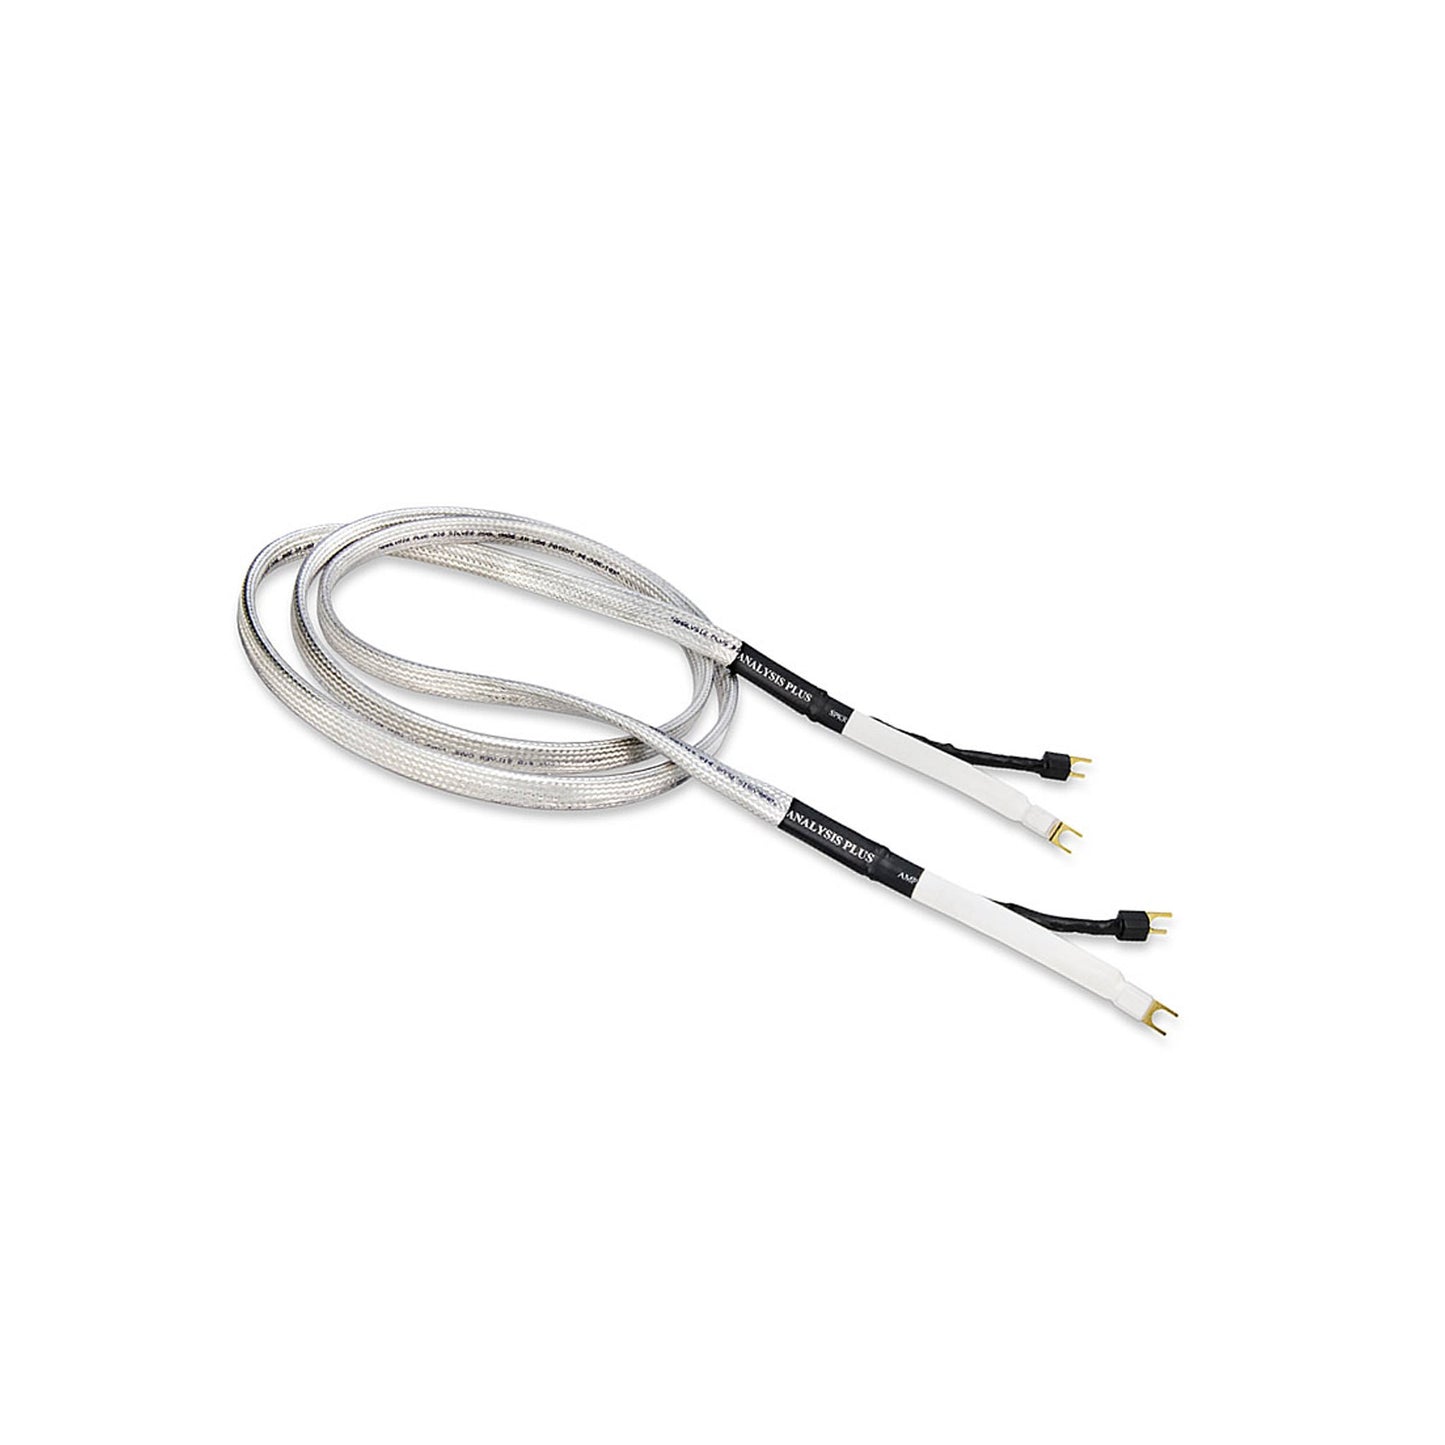 Analysis Plus Big Silver Oval Speaker Cable - Trimira